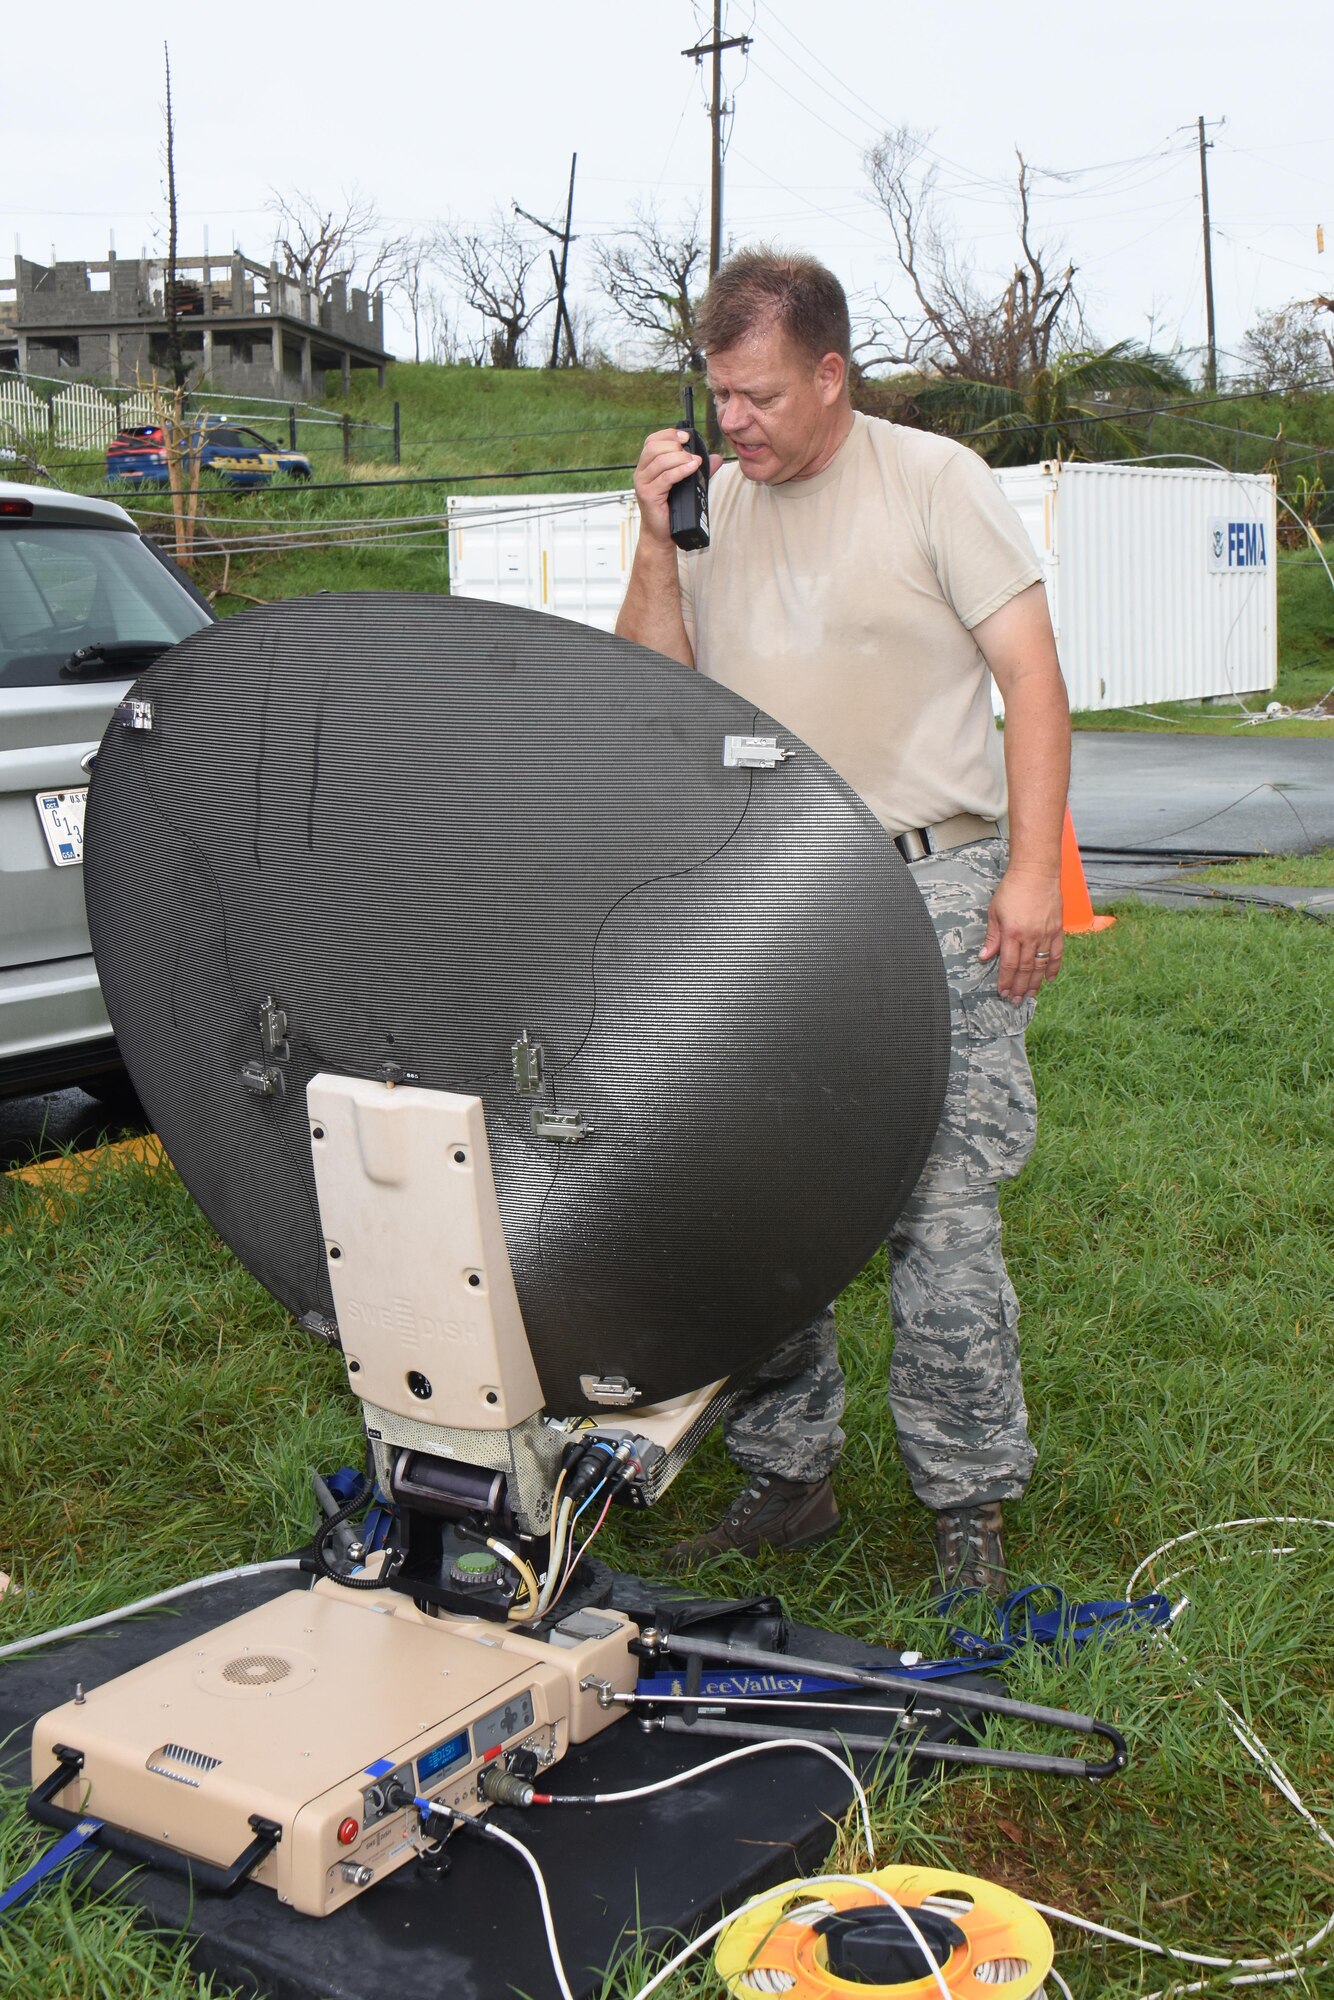 Air National Guard Chief Master Sgt. Don Johnnson, Joint Incident Site Communication Capability noncommissioned officer in charge with the 151st Air Refueling Wing Communications Flight in Salt Lake City, Utah, confirms configuration status of a SWE-DISH CCT120 satellite dish outside the Leonard B. Francis Armory in St. Thomas, U.S. Virgin Islands, Sept. 20, 2017. The Sept. 7 deployment of the Utah JISCC helped re-establish critical military and emergency civil service communications within areas of the U.S. Virgin Islands severely impacted by Hurricanes Irma and Maria. (U.S. Air National Guard photo by Master Sgt. Paul Gorman)